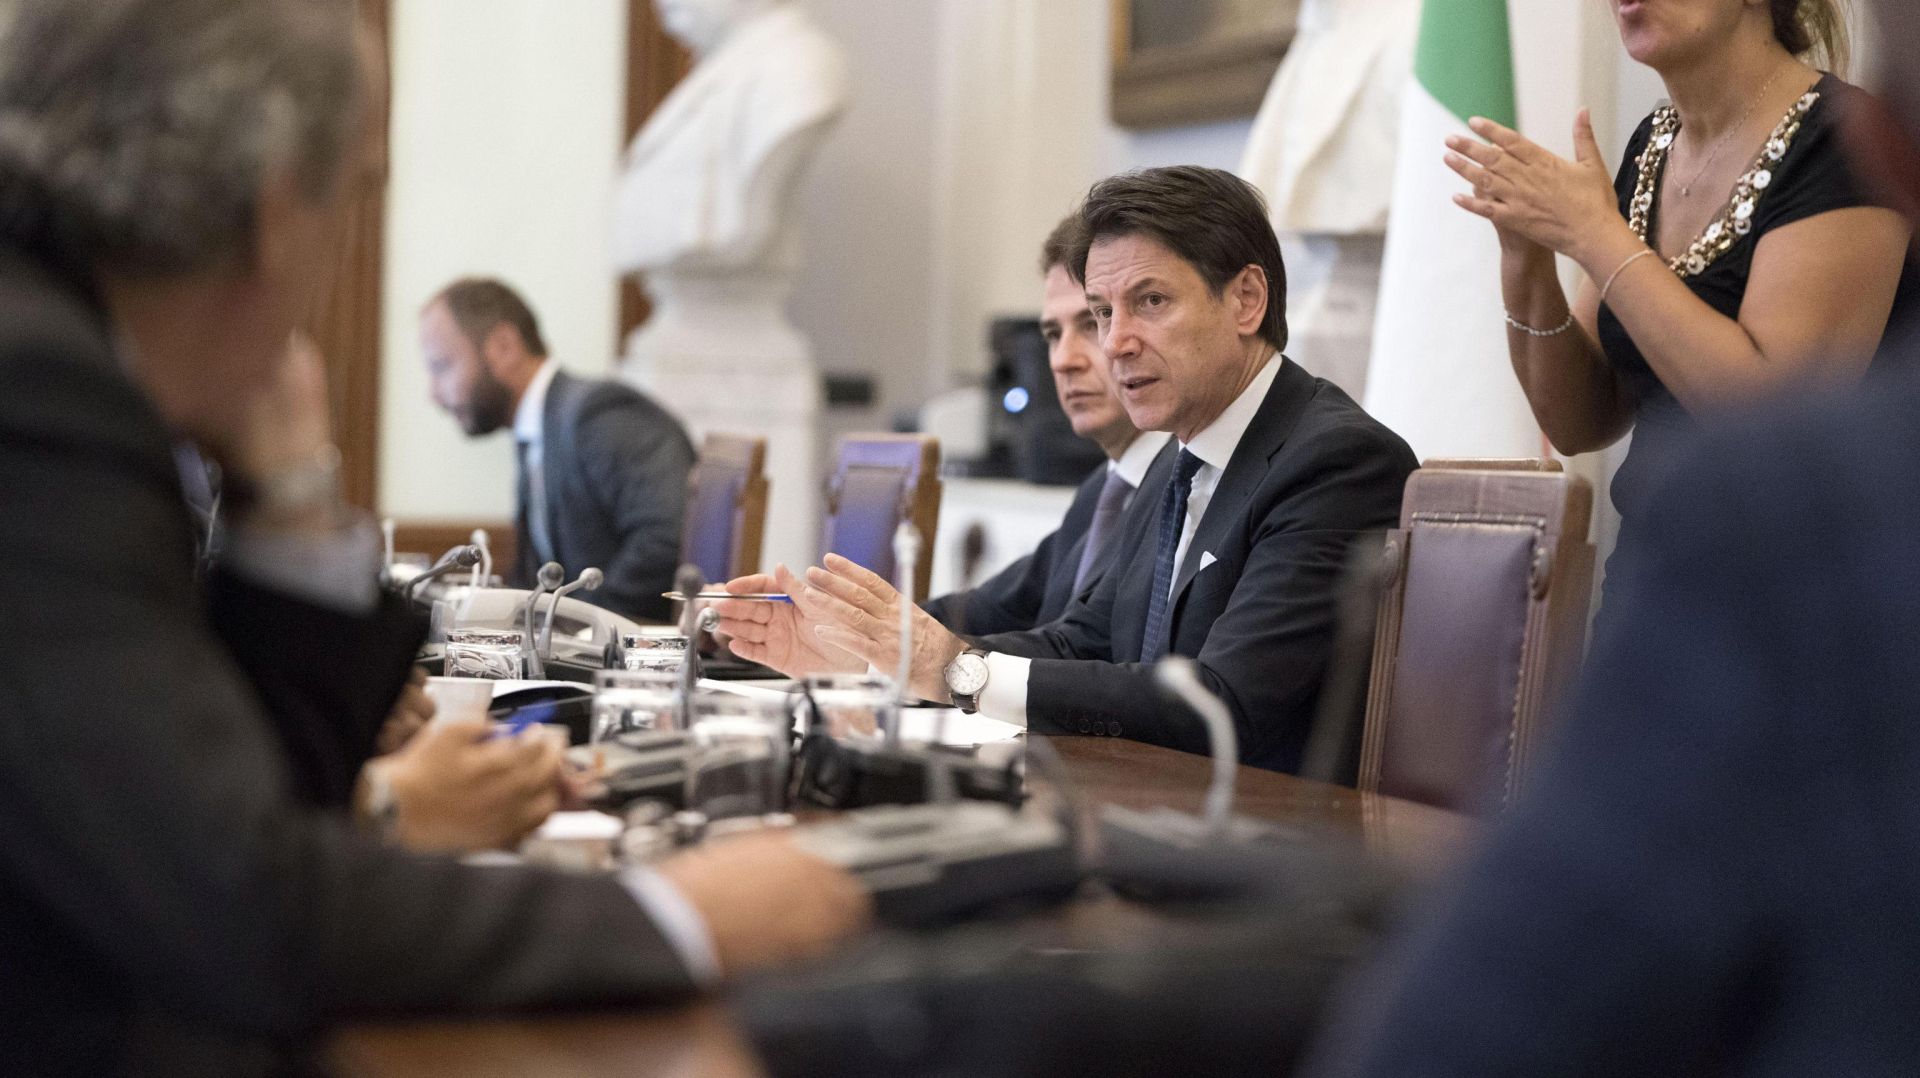 epa07812257 A handout photo made available by Chigi Palace shows Italian designated Prime Minister Giuseppe Conte (C) meeting a delegation of the associations for physically challenged people in Rome, Italy, 02 September 2019. Conte, who received on 29 August from Italian President Mattarella a mandate to form a new government, is carrying out government-formation consultations at the Lower House.  EPA/FILIPPO ATTILI/CHIGI PALACE HANDOUT  HANDOUT EDITORIAL USE ONLY/NO SALES